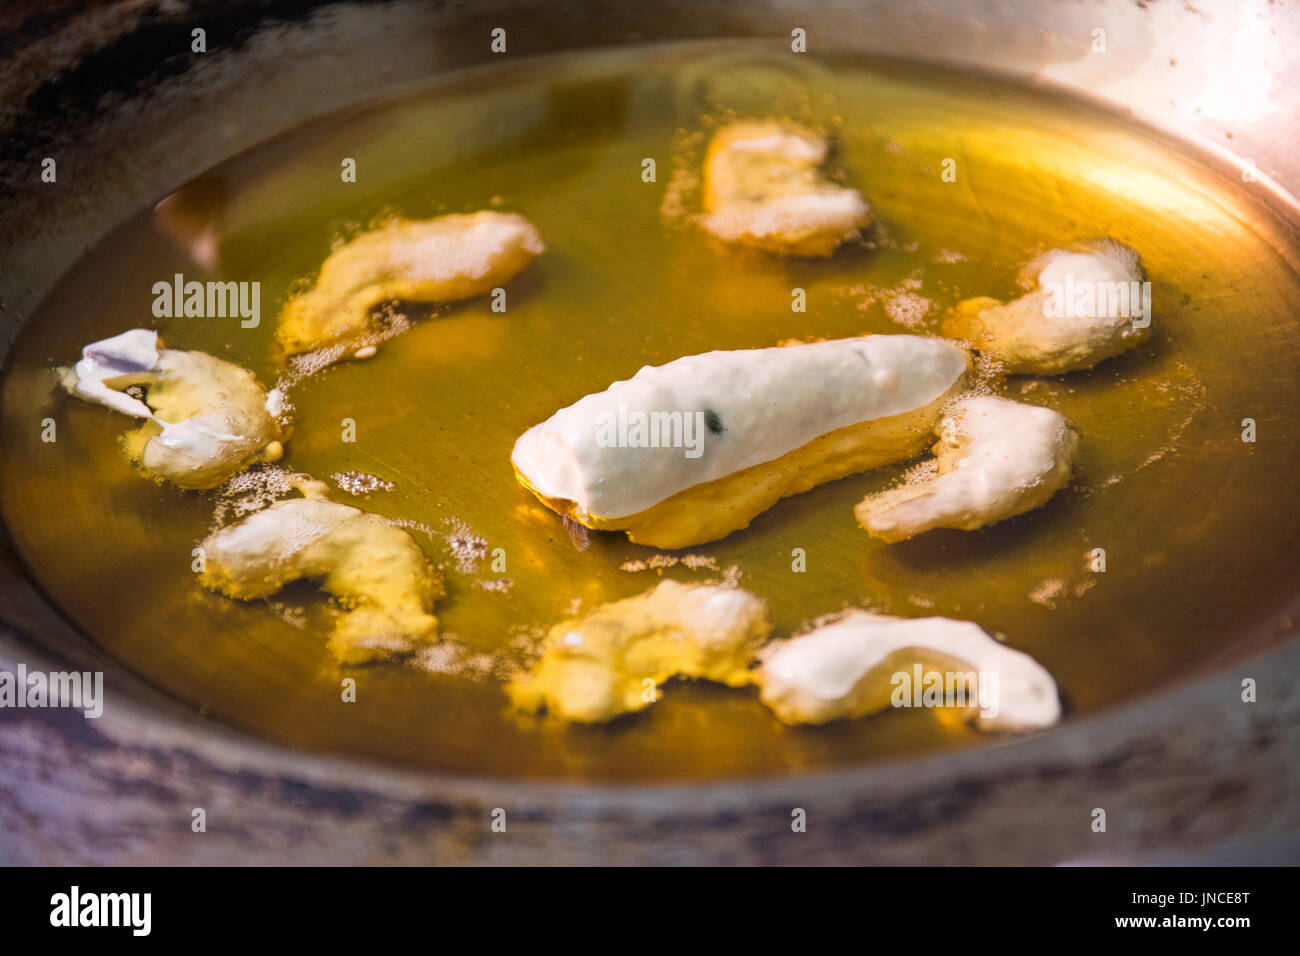 Deep frying shrimp and chili at Pez taquaria in Oaxaca, Mexico Stock Photo